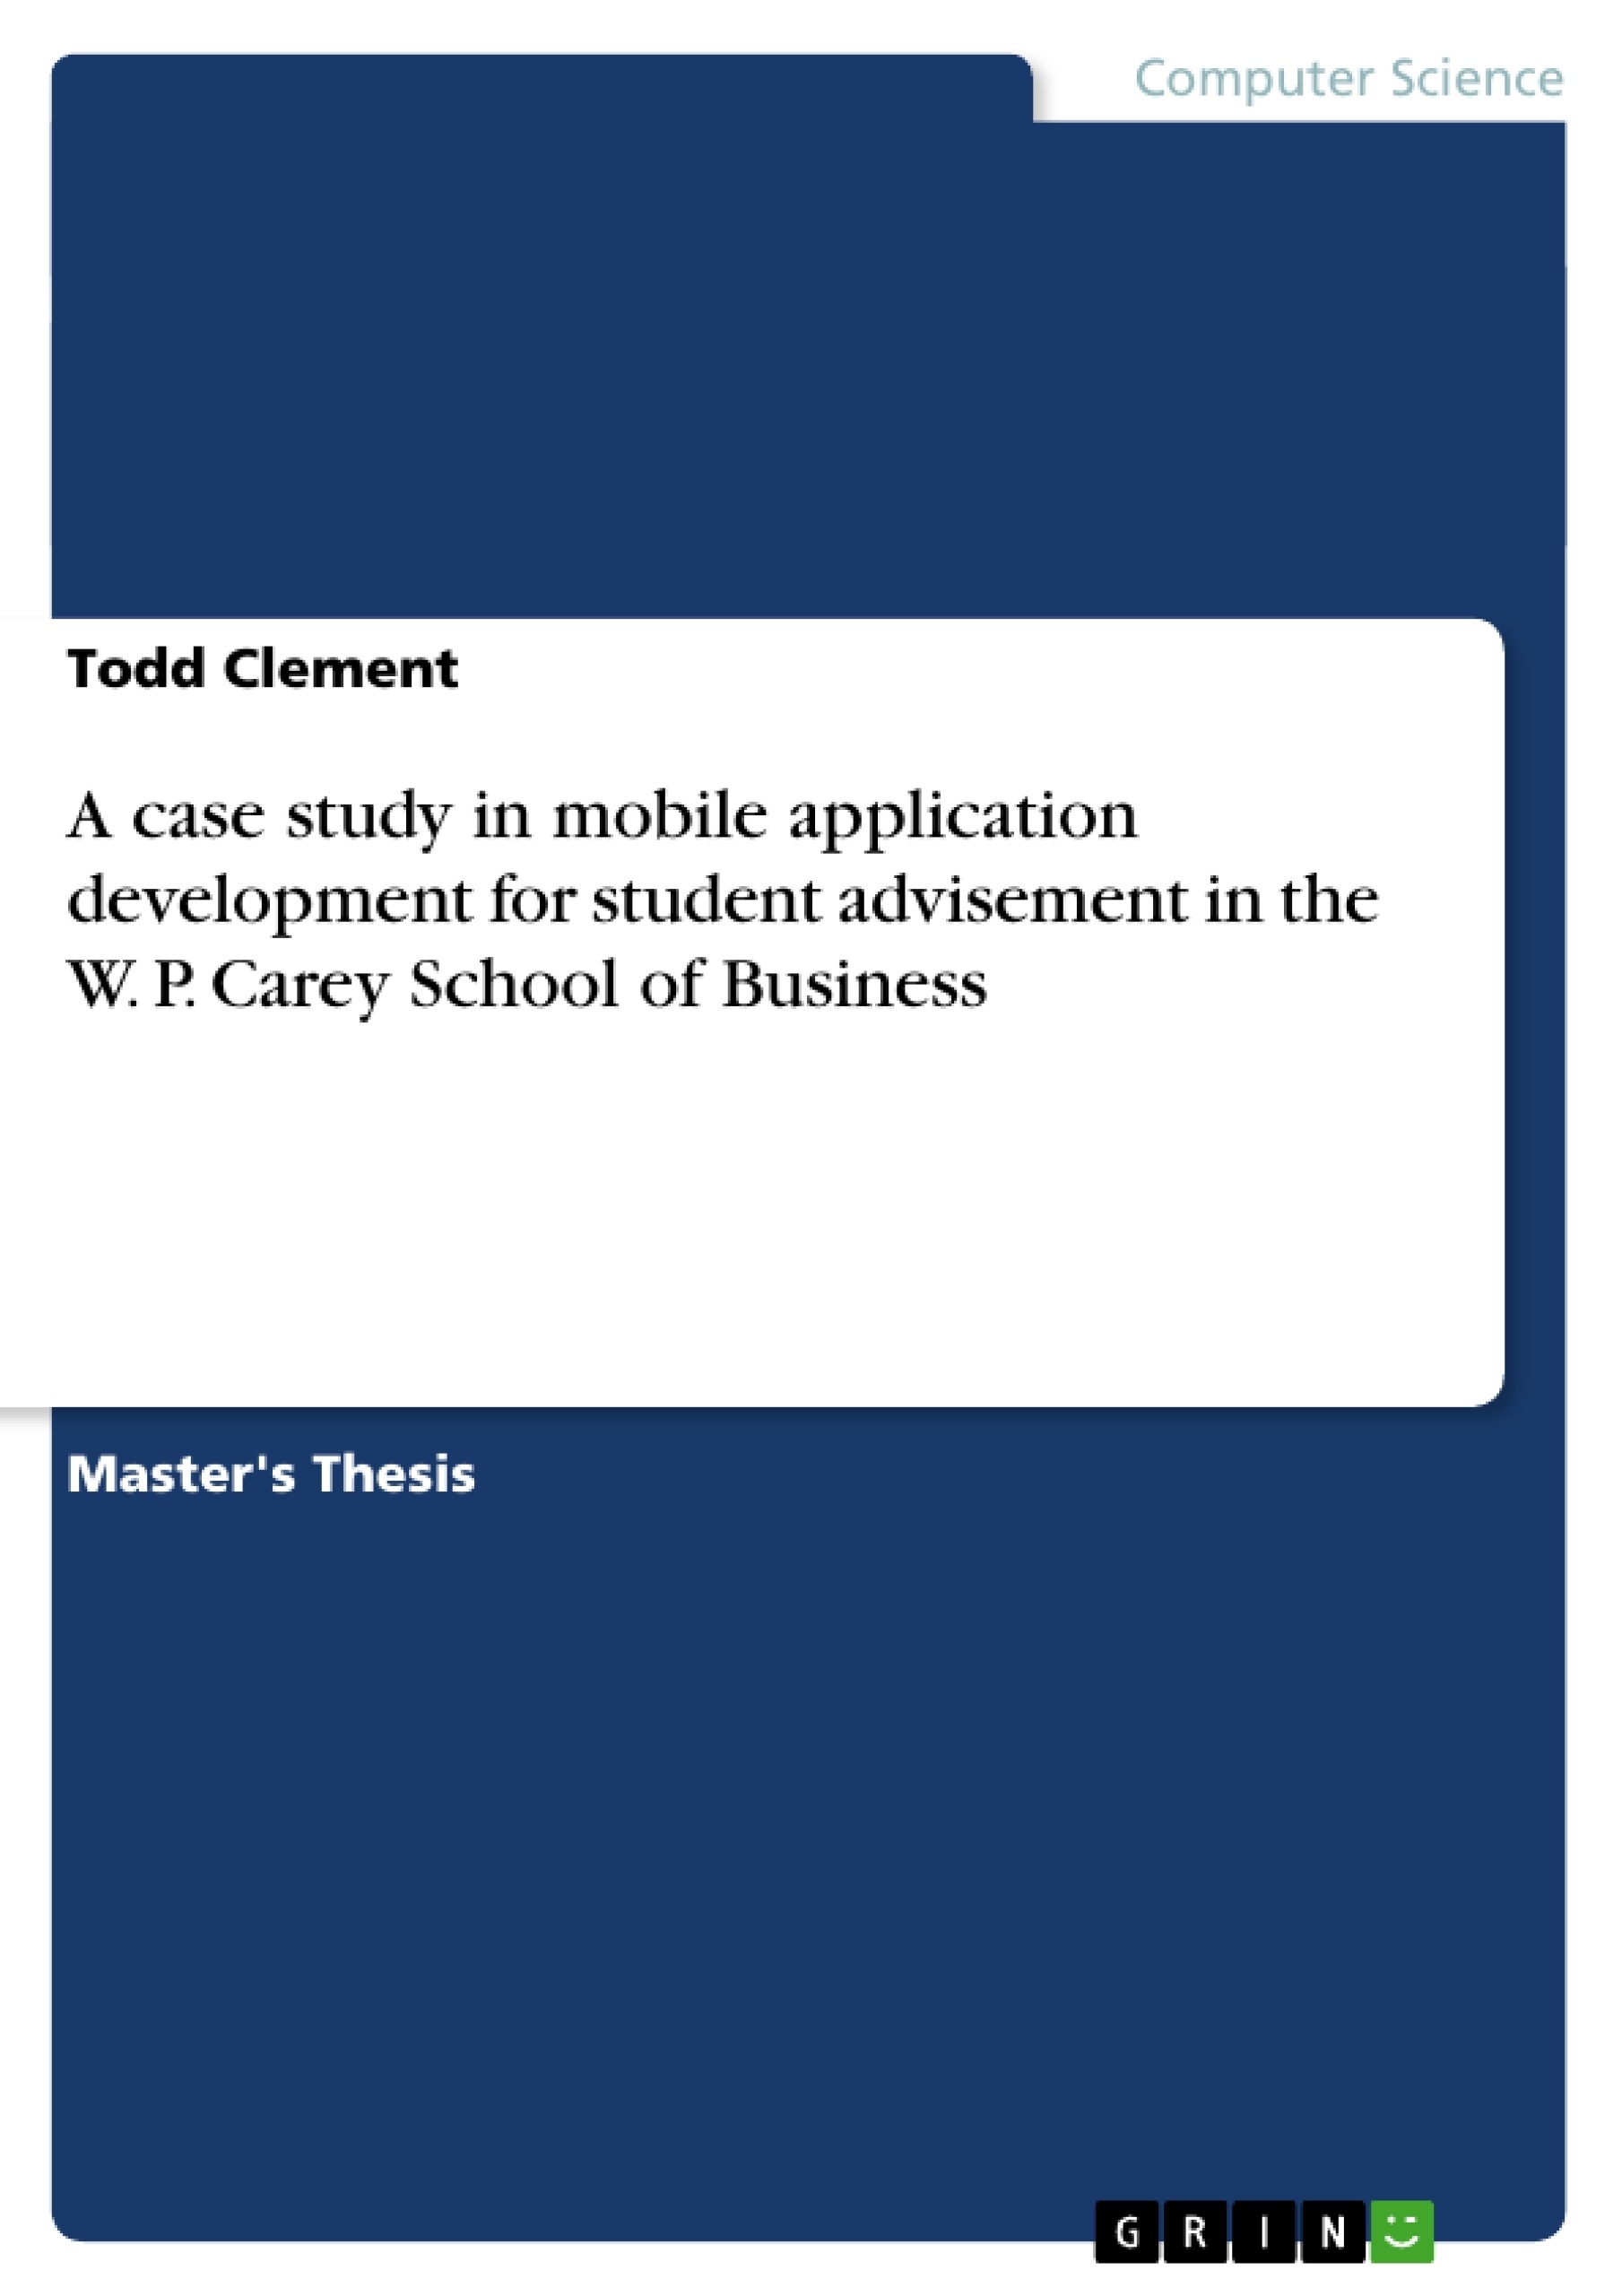 Título: A case study in mobile application development for student advisement in the W. P. Carey School of Business